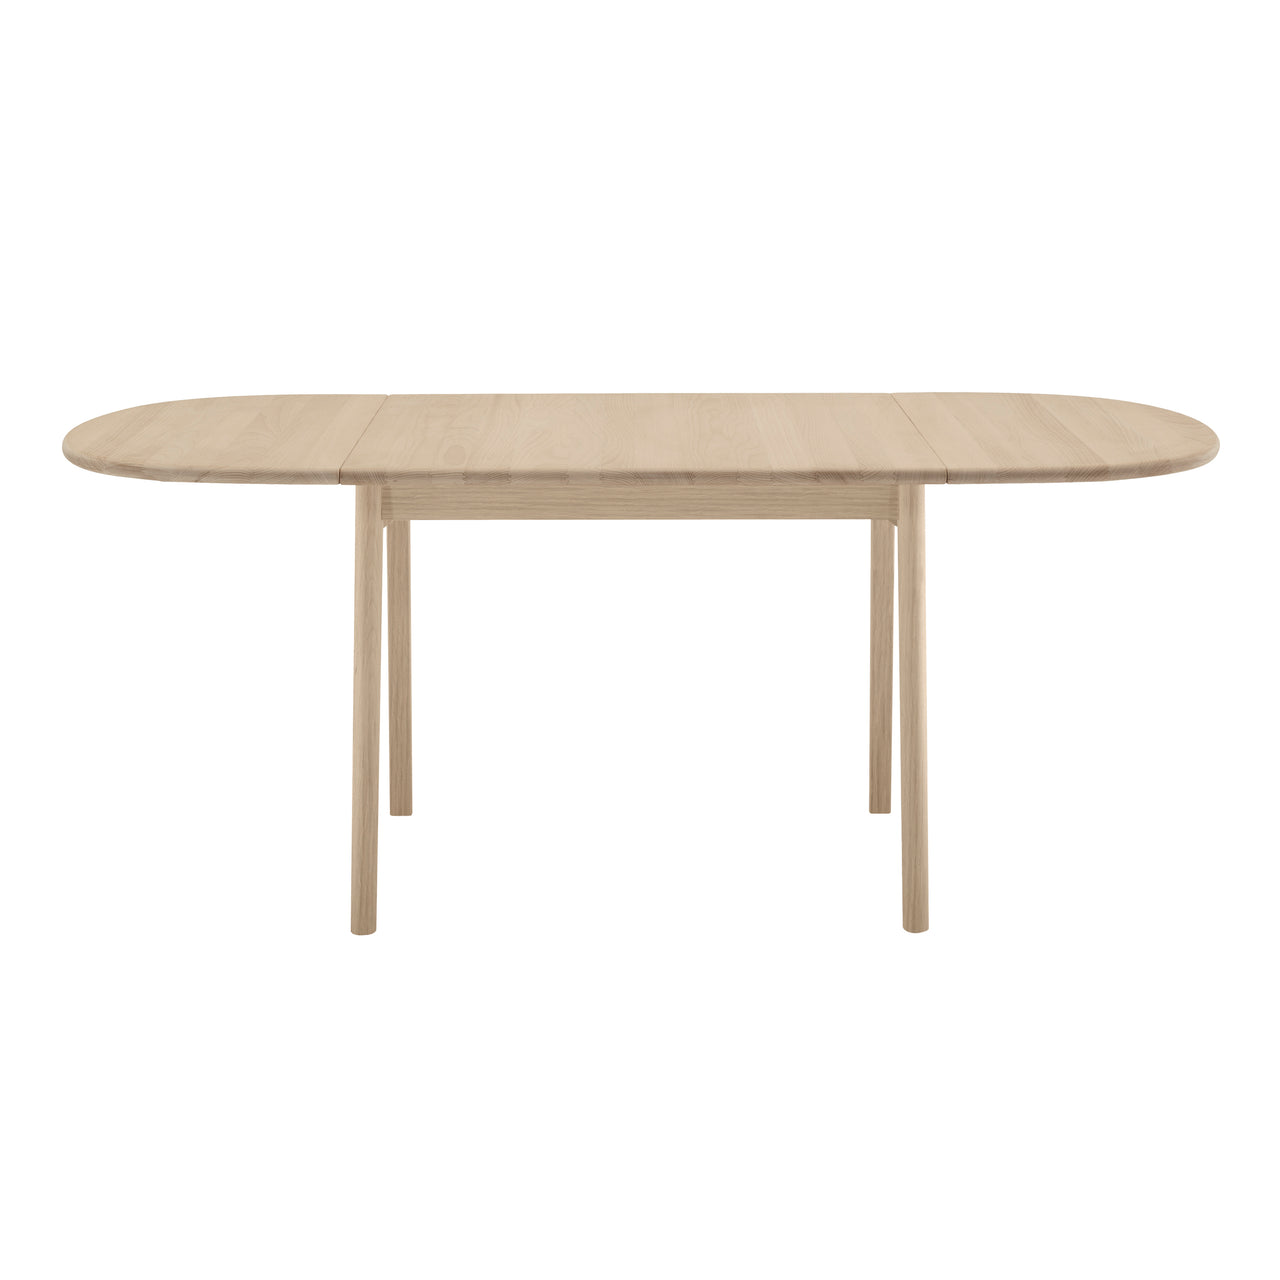 CH002 Dining Table: Soaped Oak